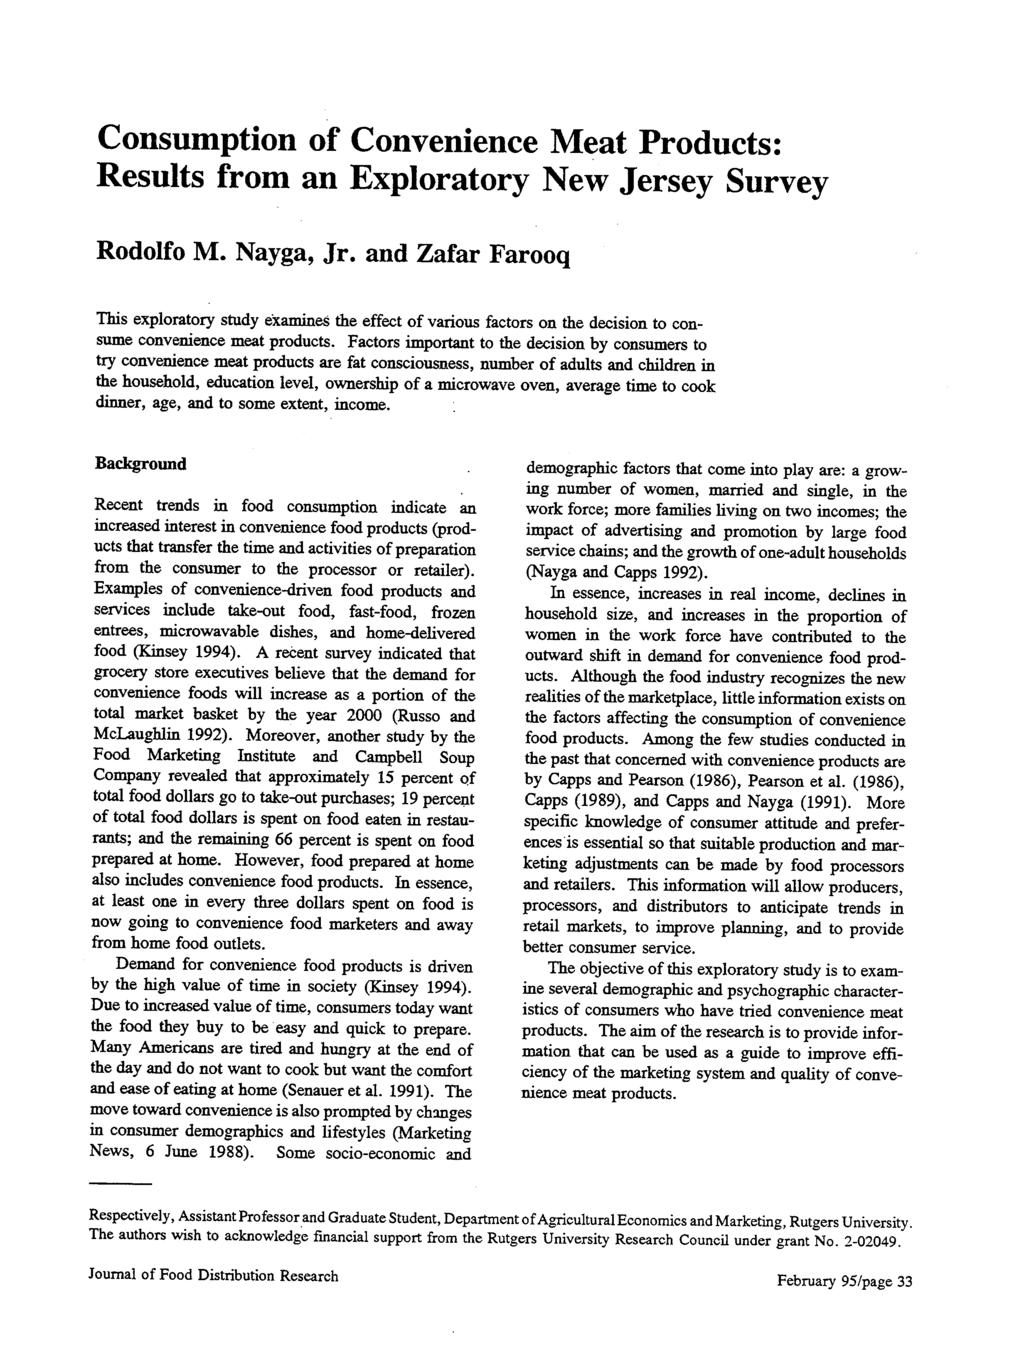 Consumption of Convenience Meat Products: Results from an Exploratory New Jersey Survey Rodolfo M. Nayga, Jr.